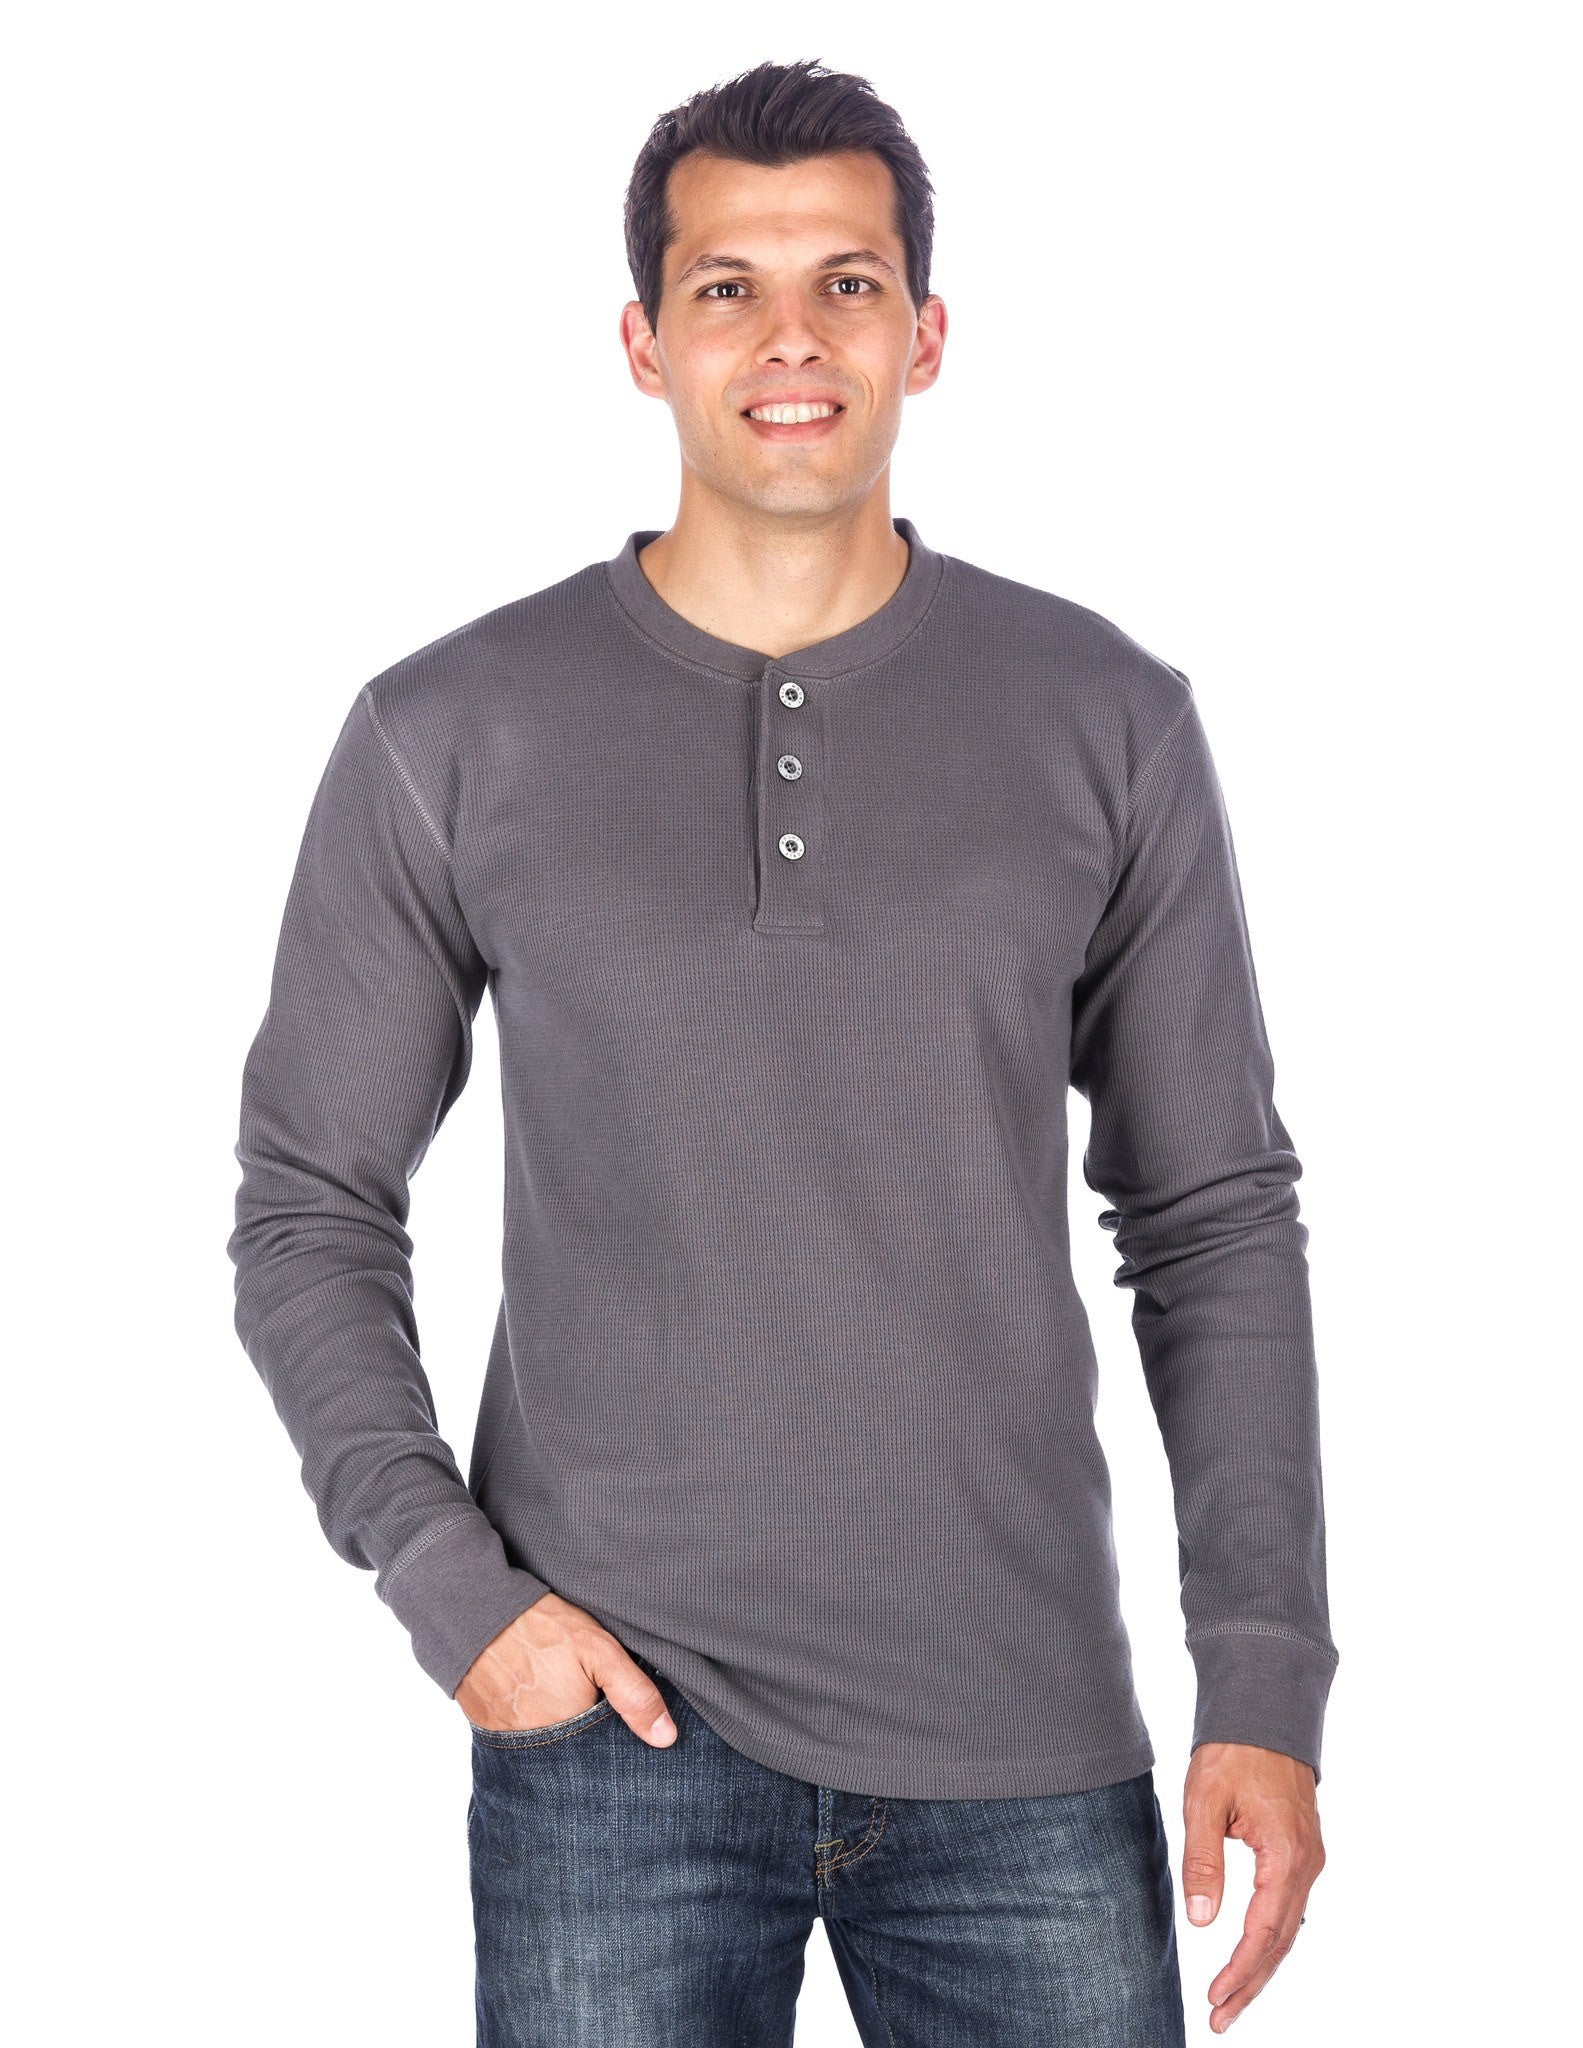 Men's Solid Thermal Henley Long Sleeve T-shirts